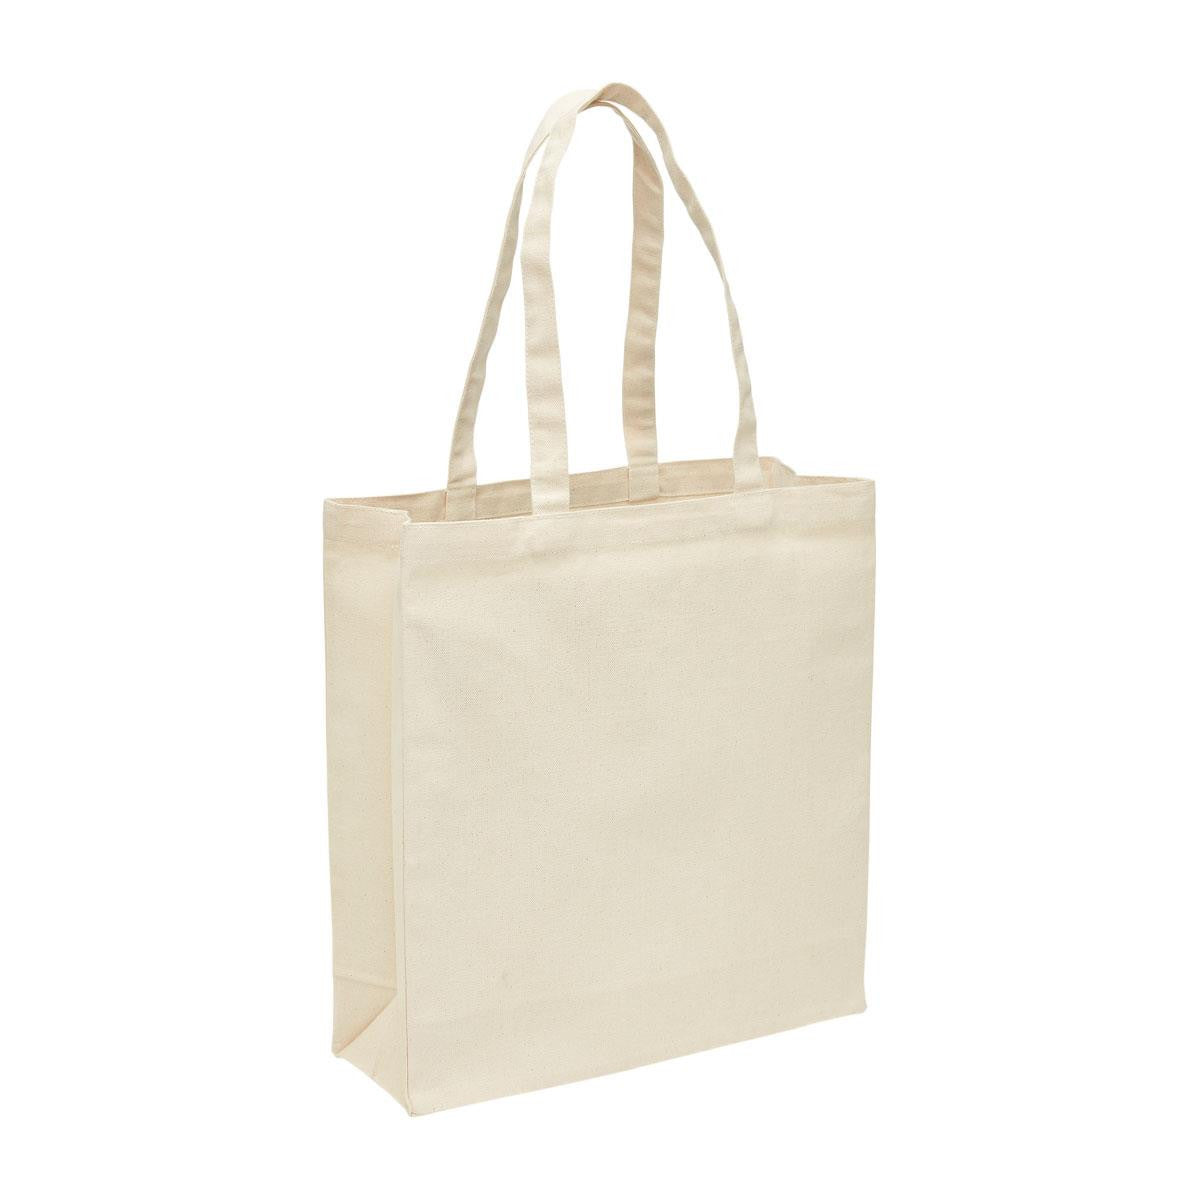 The Heavy Duty Canvas Tote | Natural